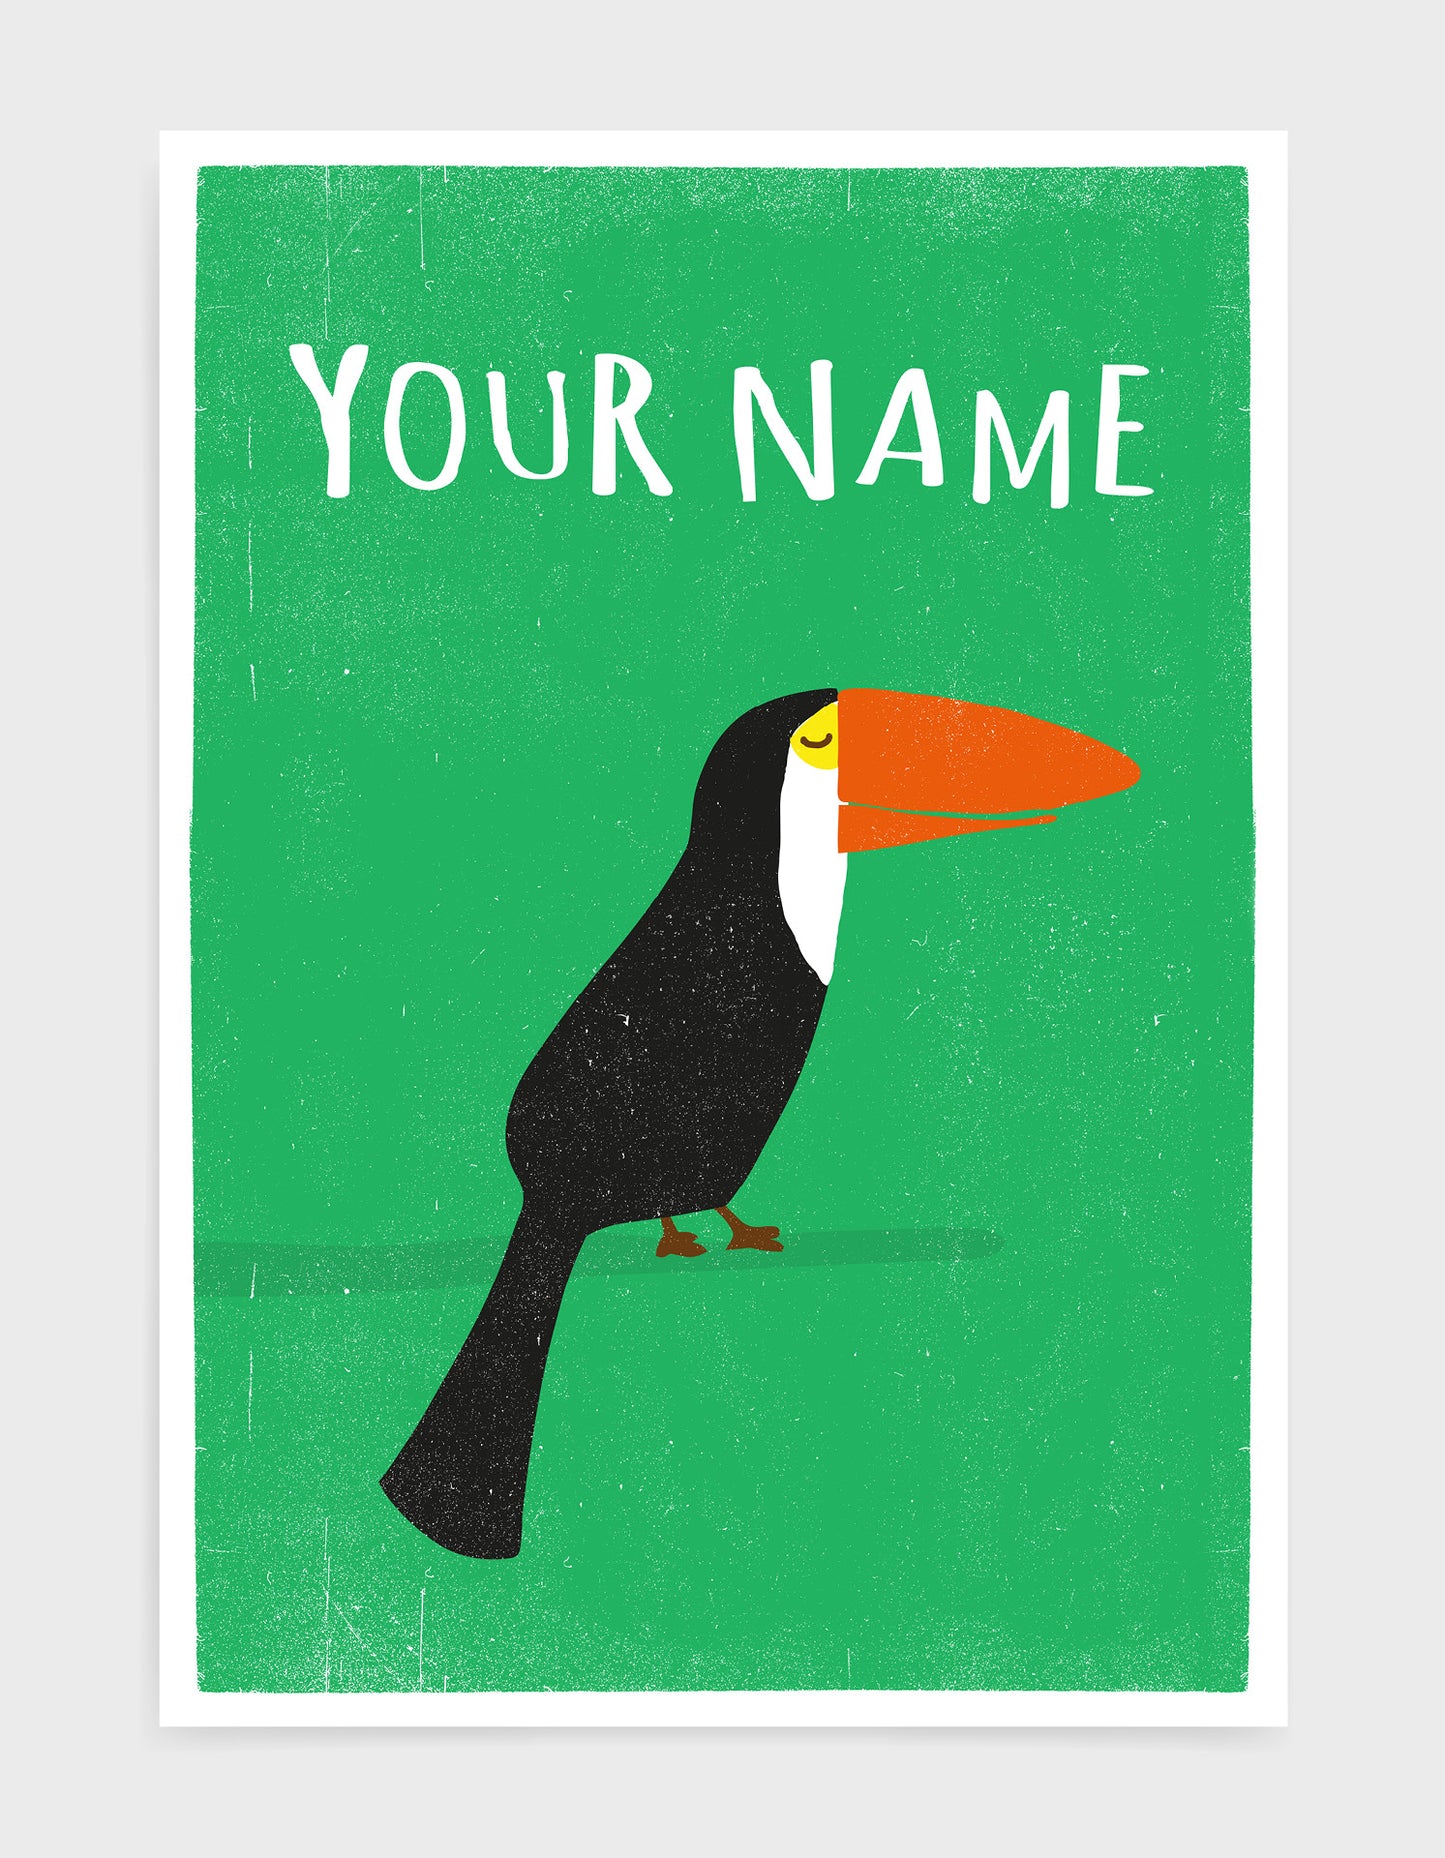 art print of a toucan bird in profile against a green background